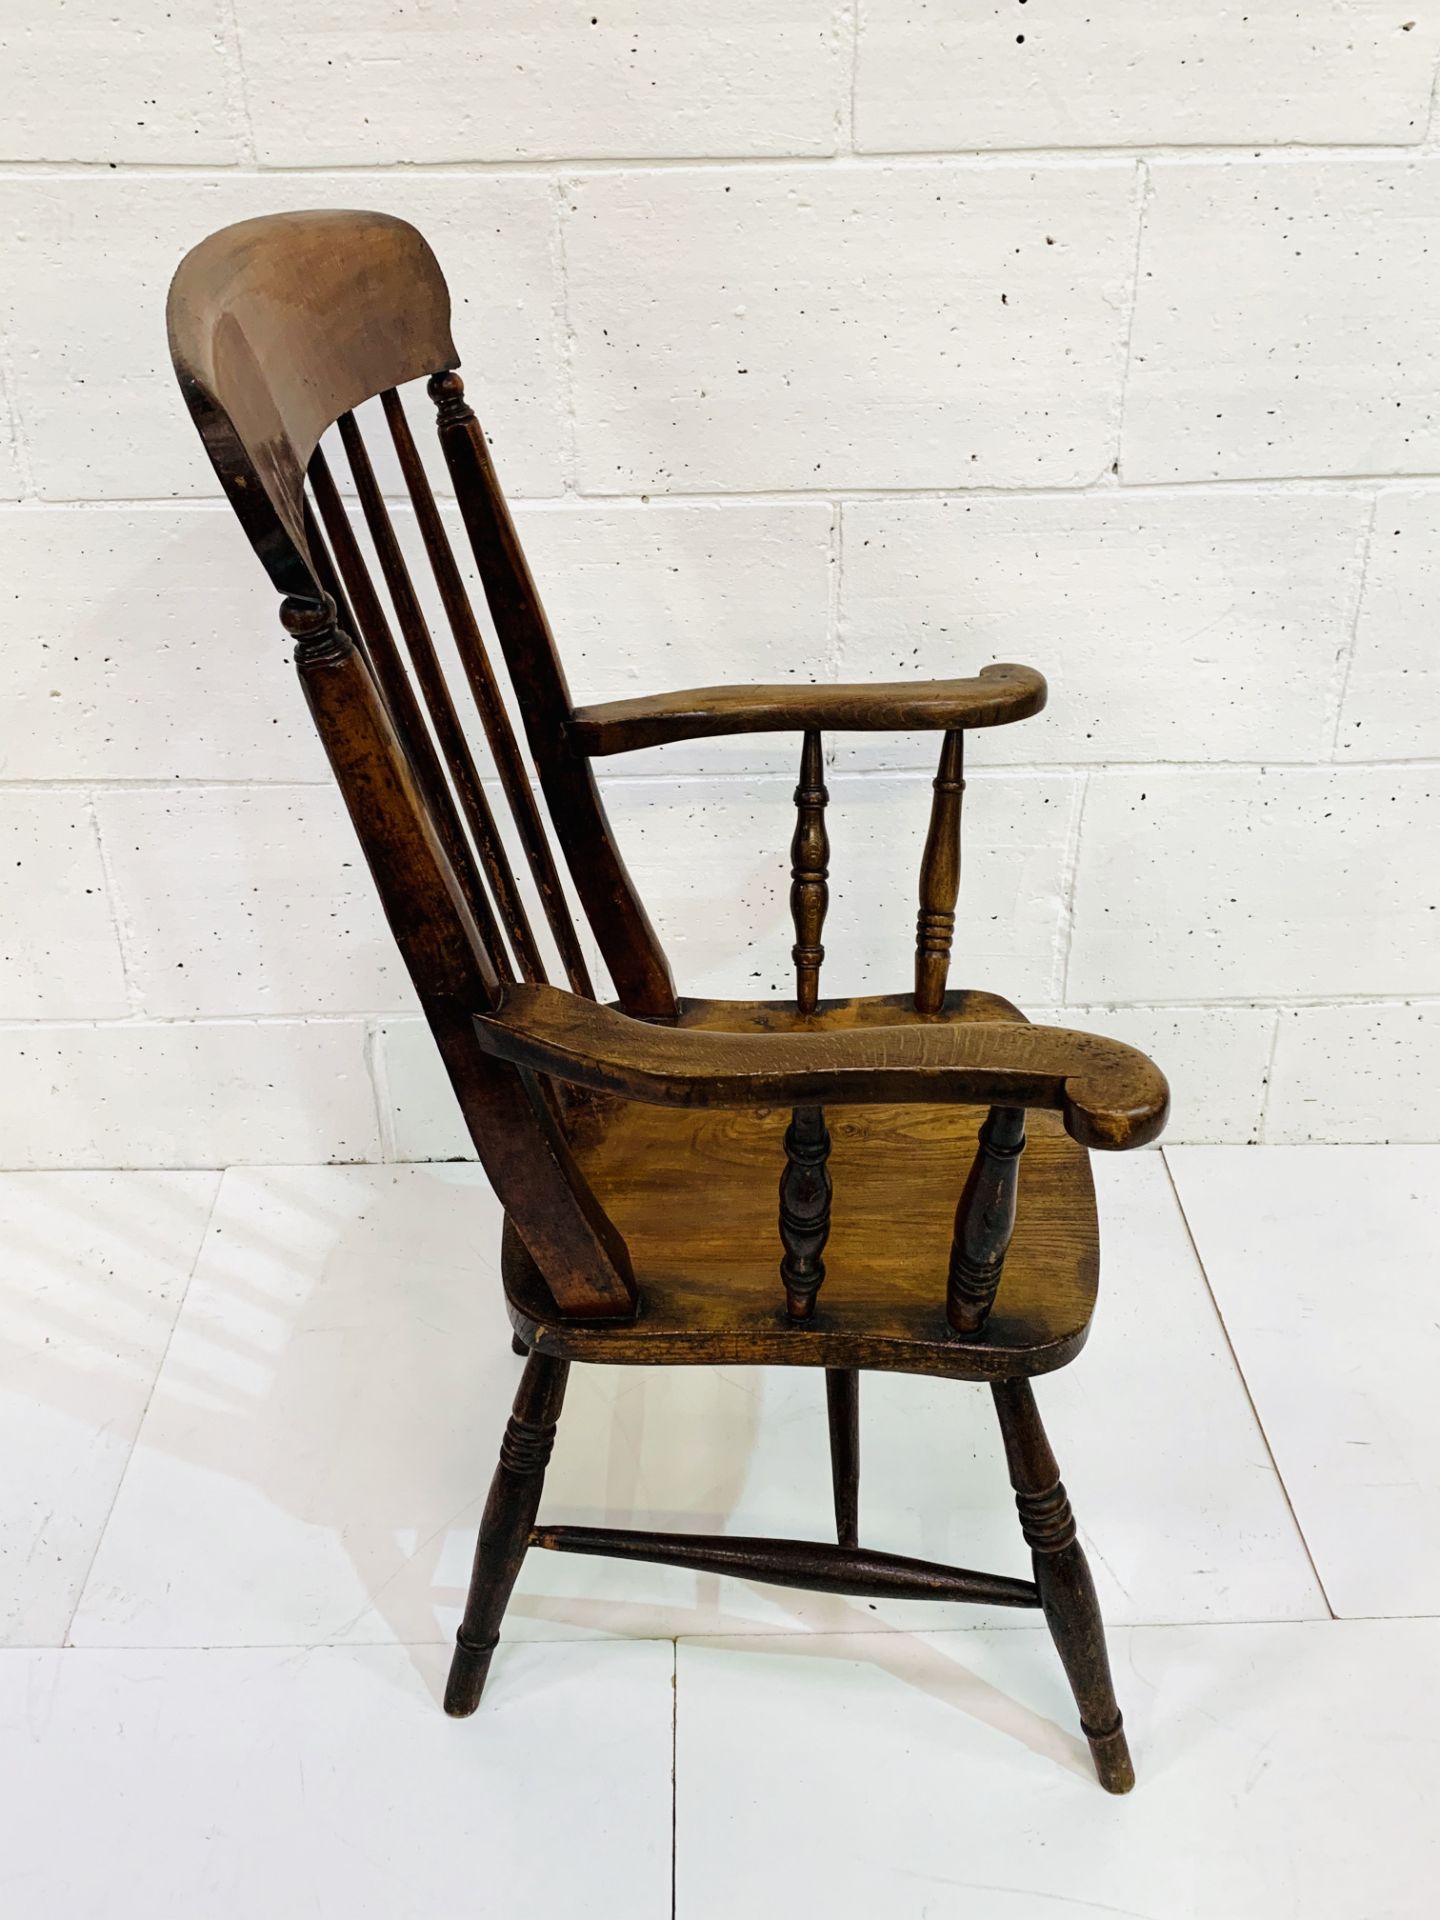 Elm seat high back farmhouse open armchair with spindle back. - Image 3 of 3